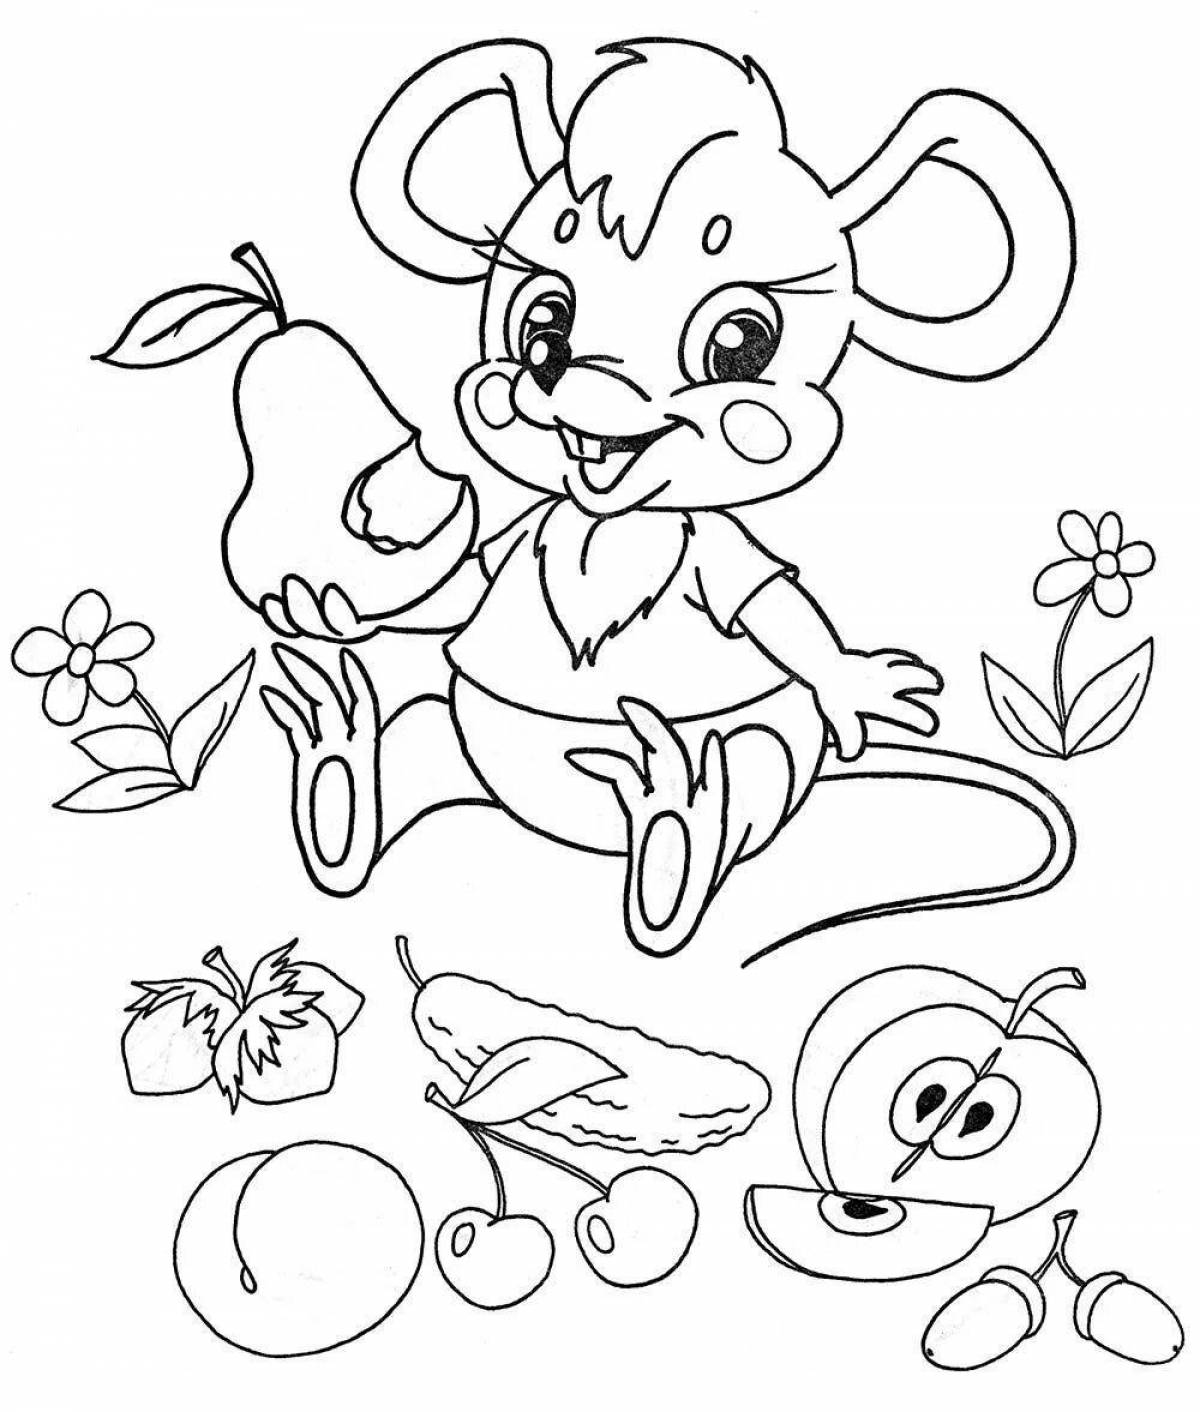 Encouragement coloring for children developing